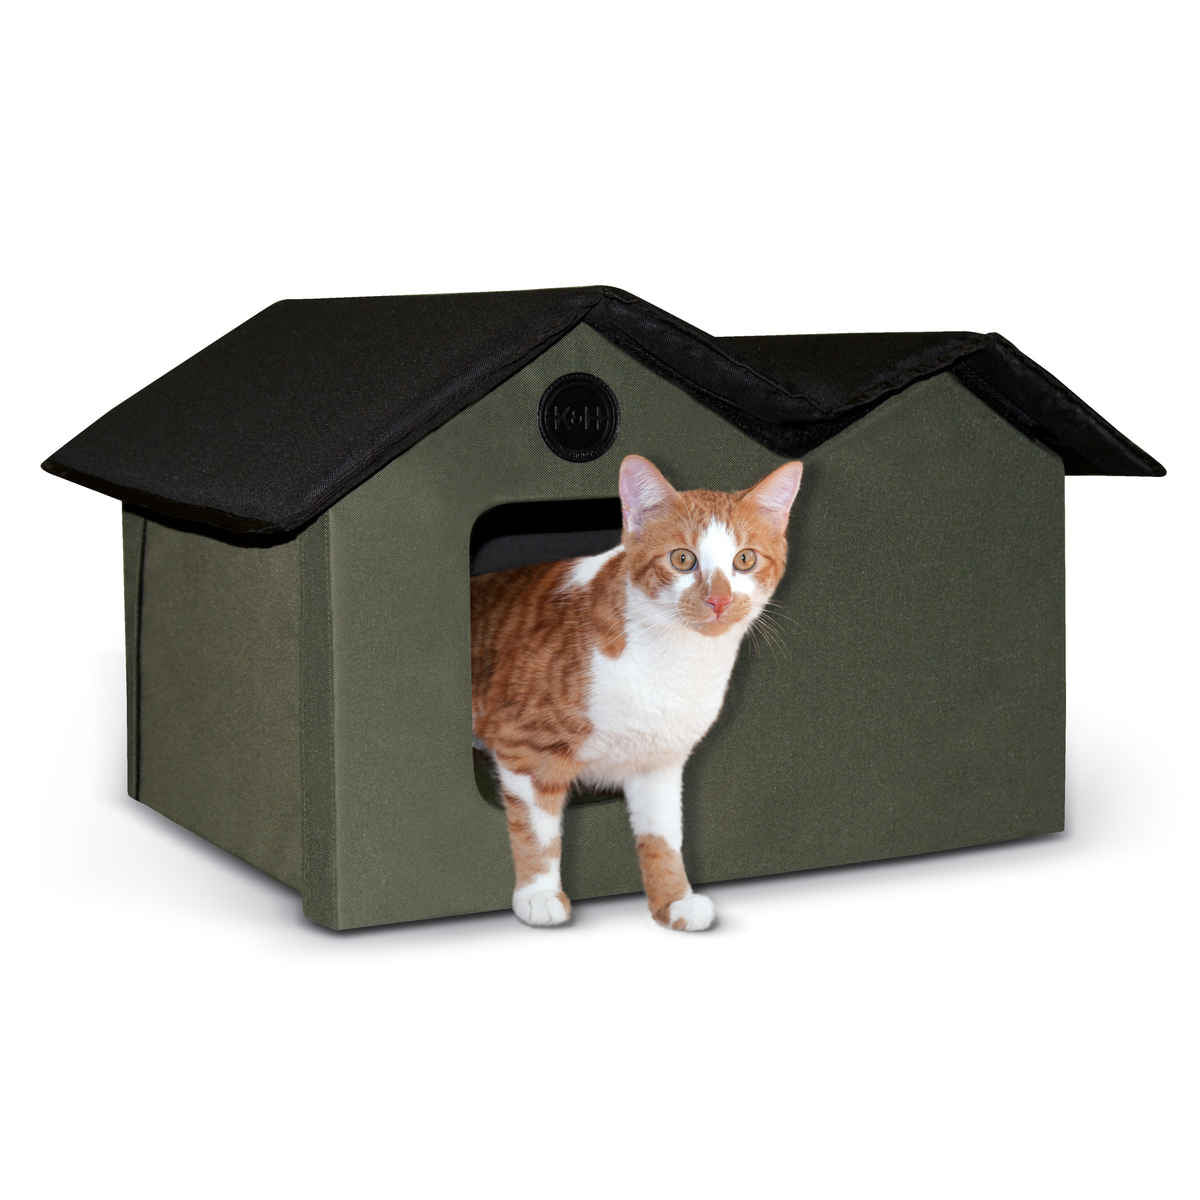 K&h Pet Products Kh3971 Unheated Outdoor Kitty House Extra Wide